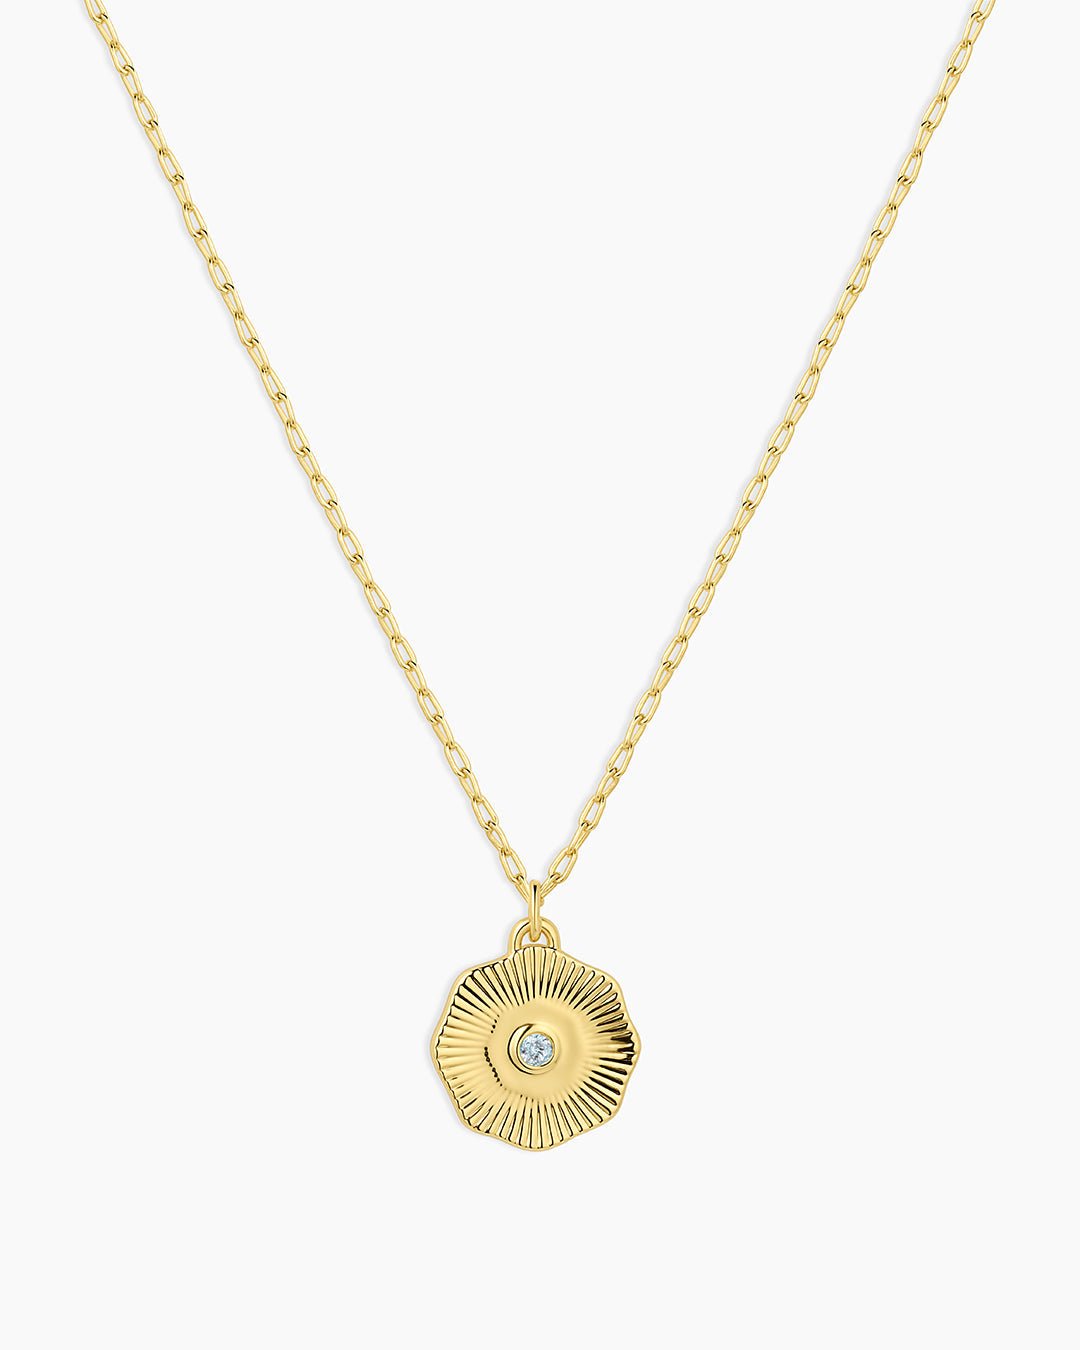 Birthstone Coin Necklace || option::Gold Plated, Aquamarine - March